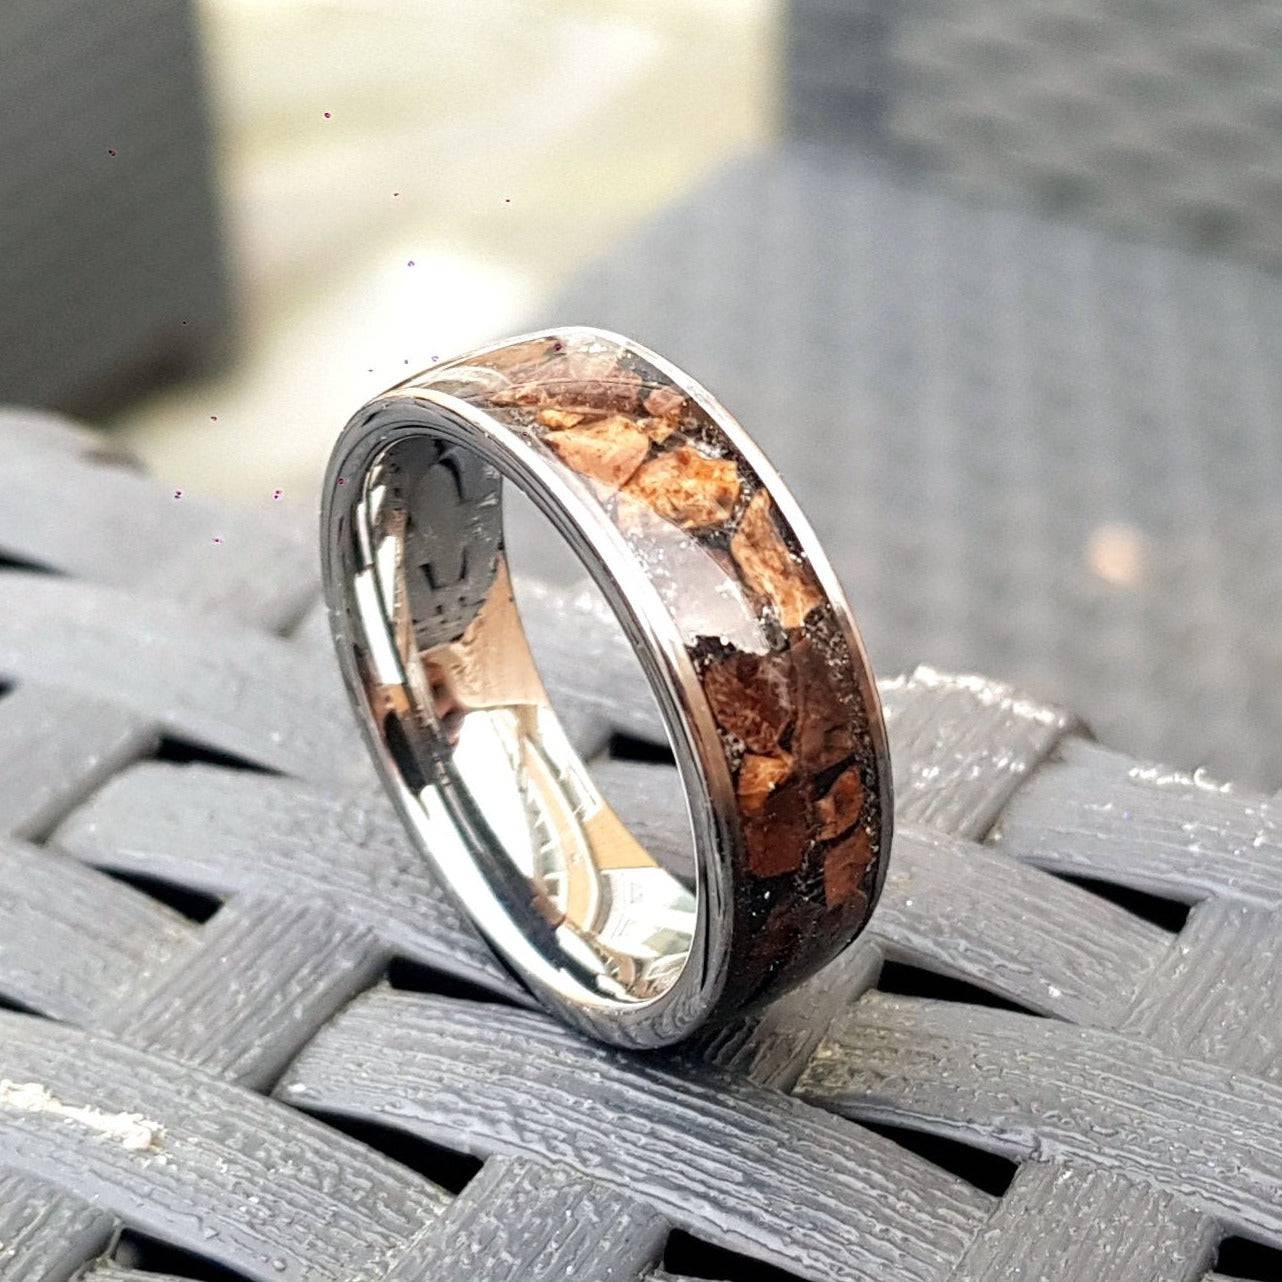 Silver tungsten ring with Trex fossil